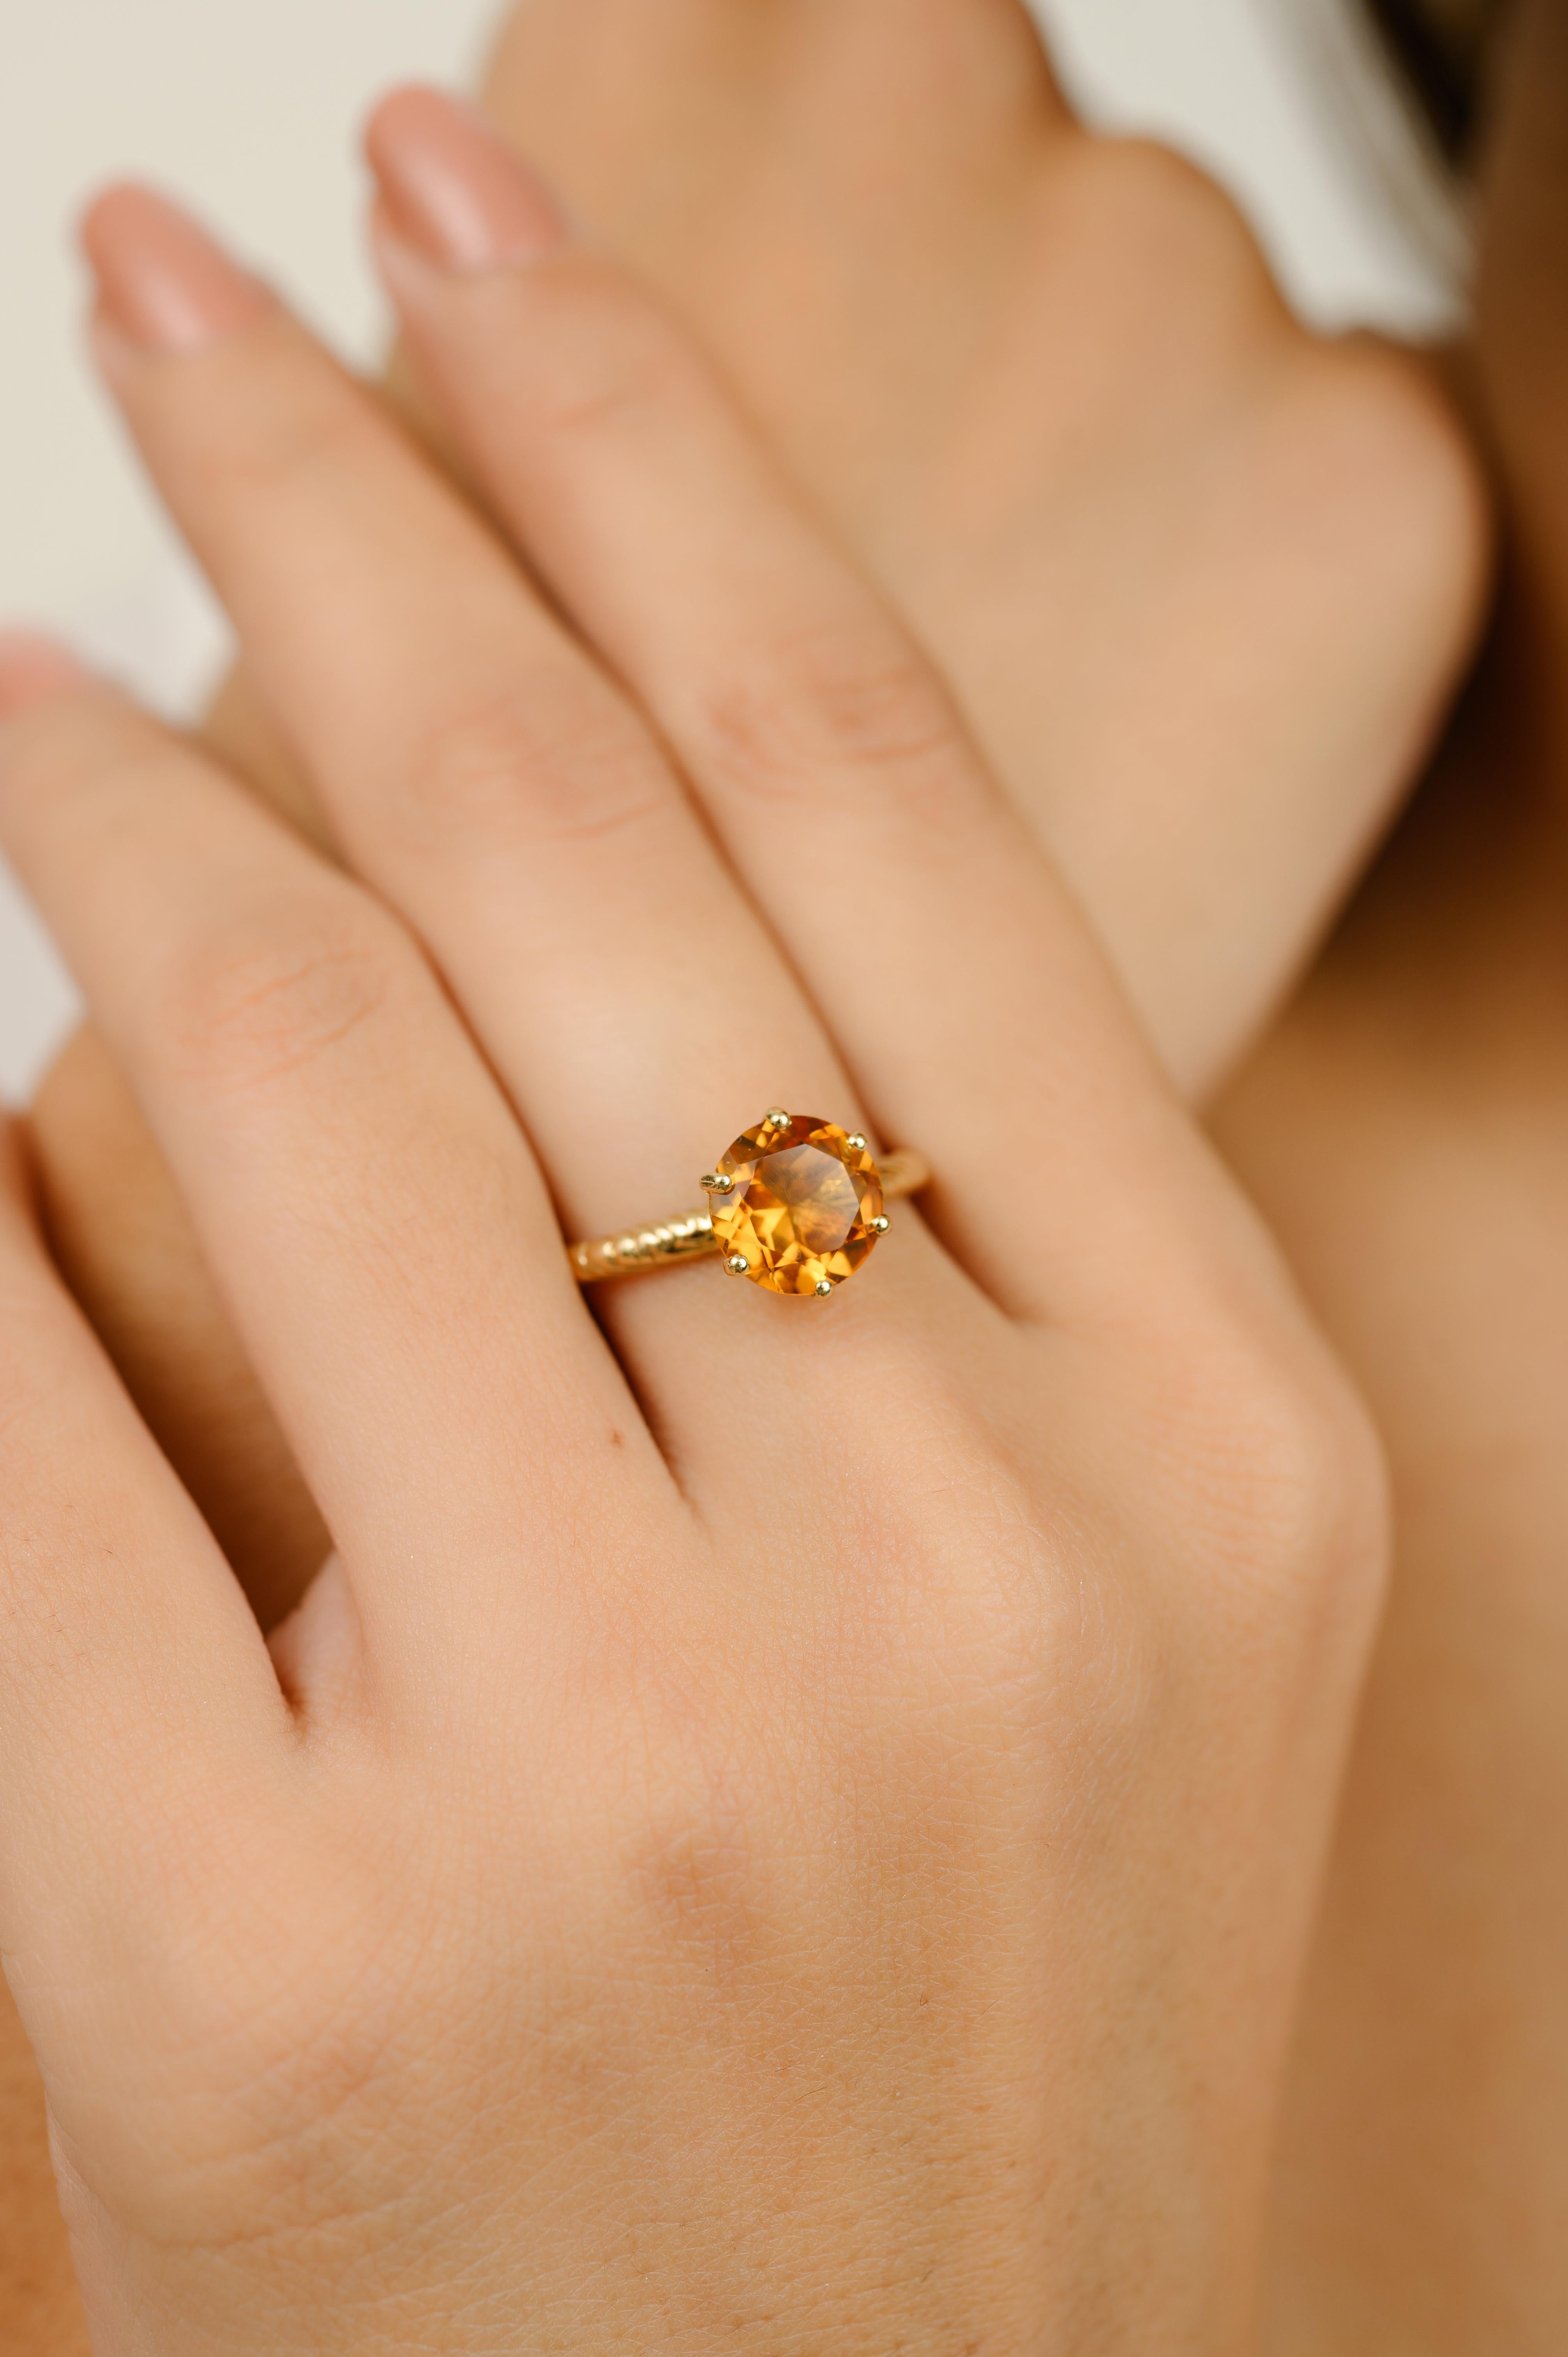 For Sale:  Round Cut Citrine Gemstone Solitaire Ring in 14k Solid Yellow Gold 4